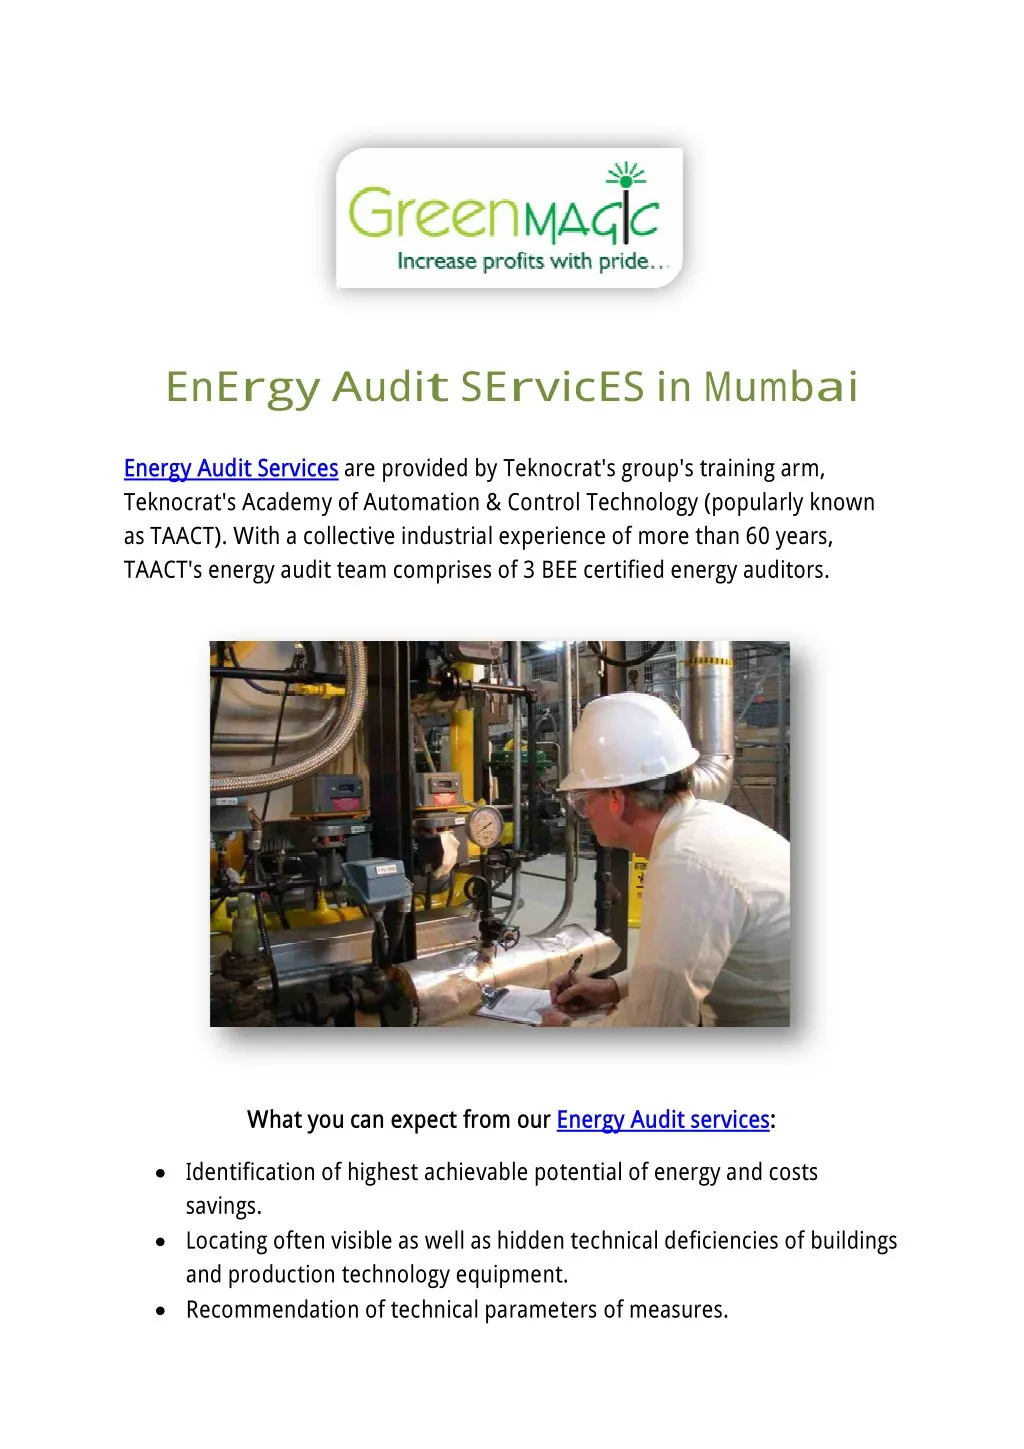 ener gy audit ser vices in mumba i energy audit